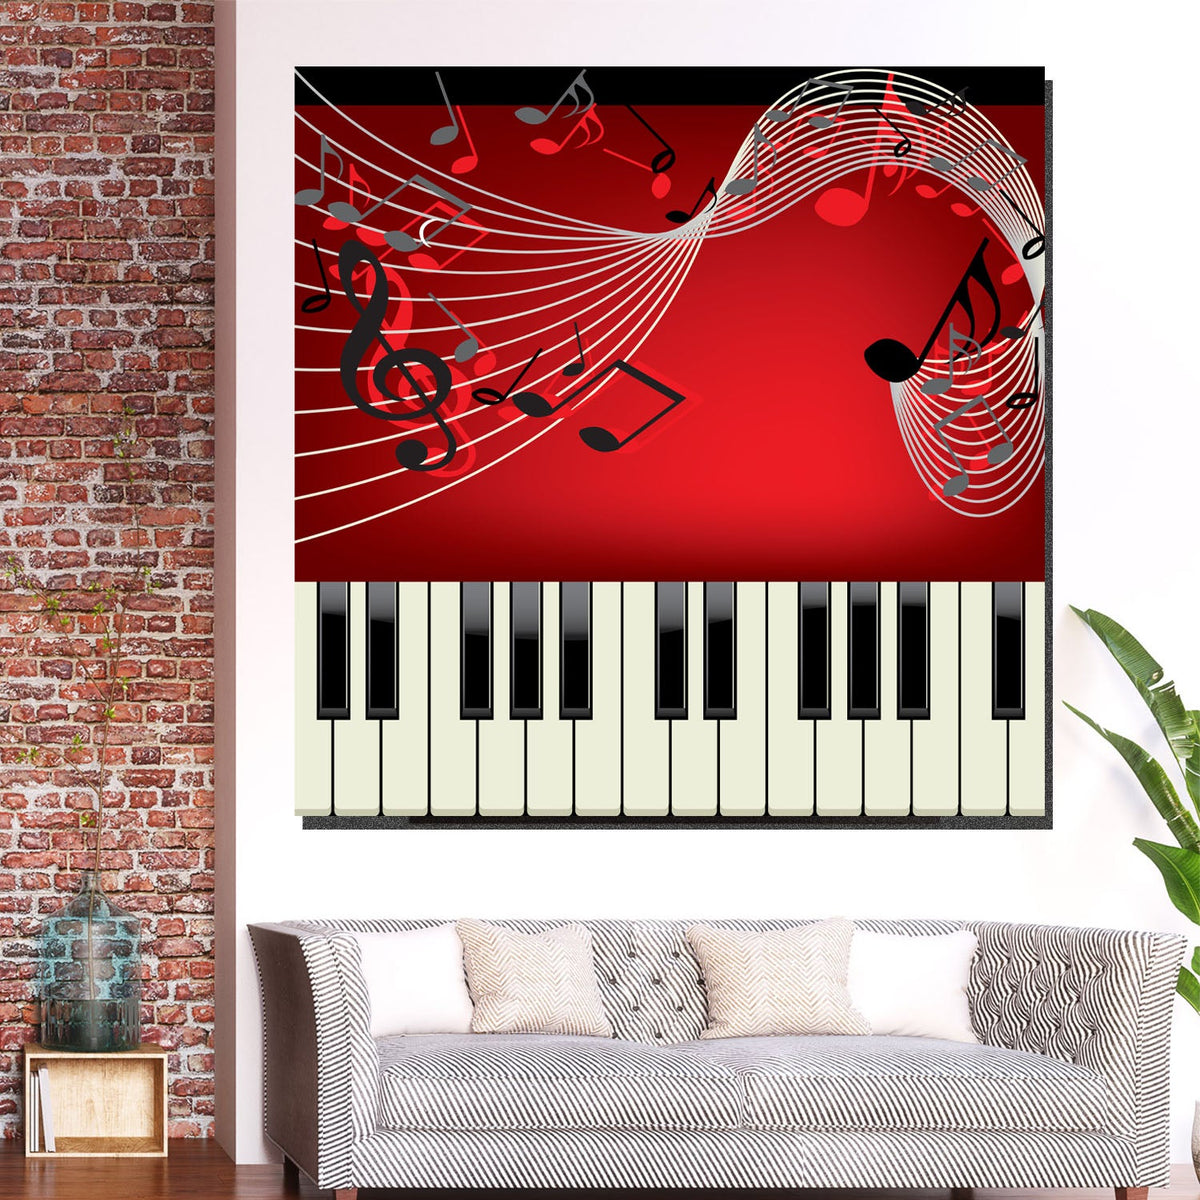 https://cdn.shopify.com/s/files/1/0387/9986/8044/products/PianoandMusicalNotesCanvasArtprintStretched-1.jpg